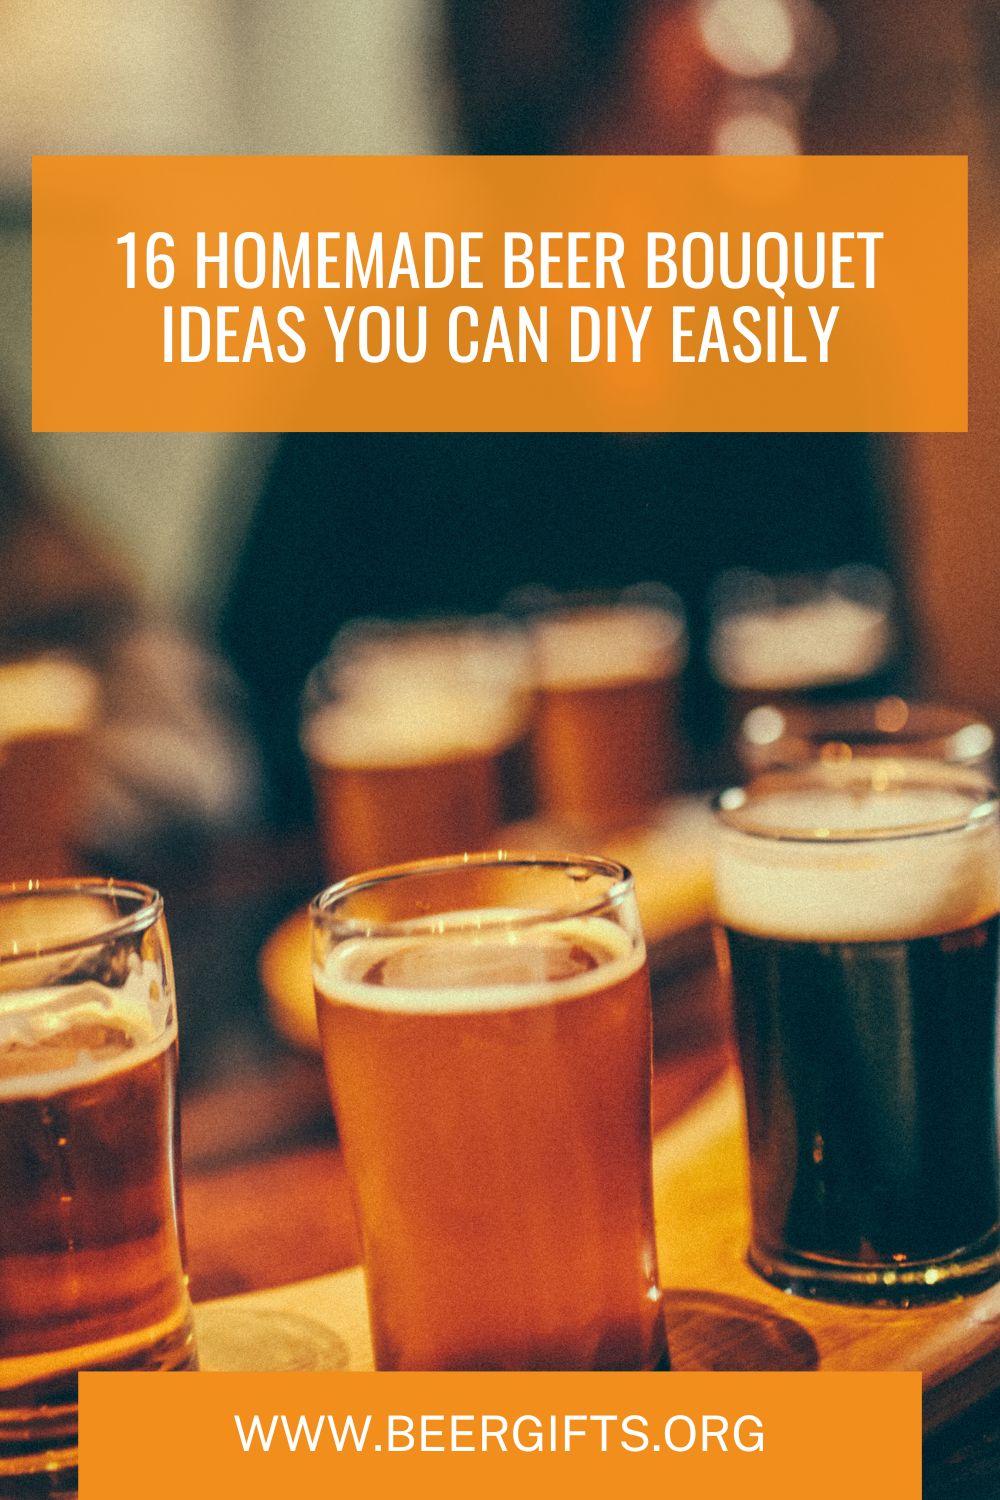 16 Homemade Beer Bouquet Ideas You Can DIY Easily2